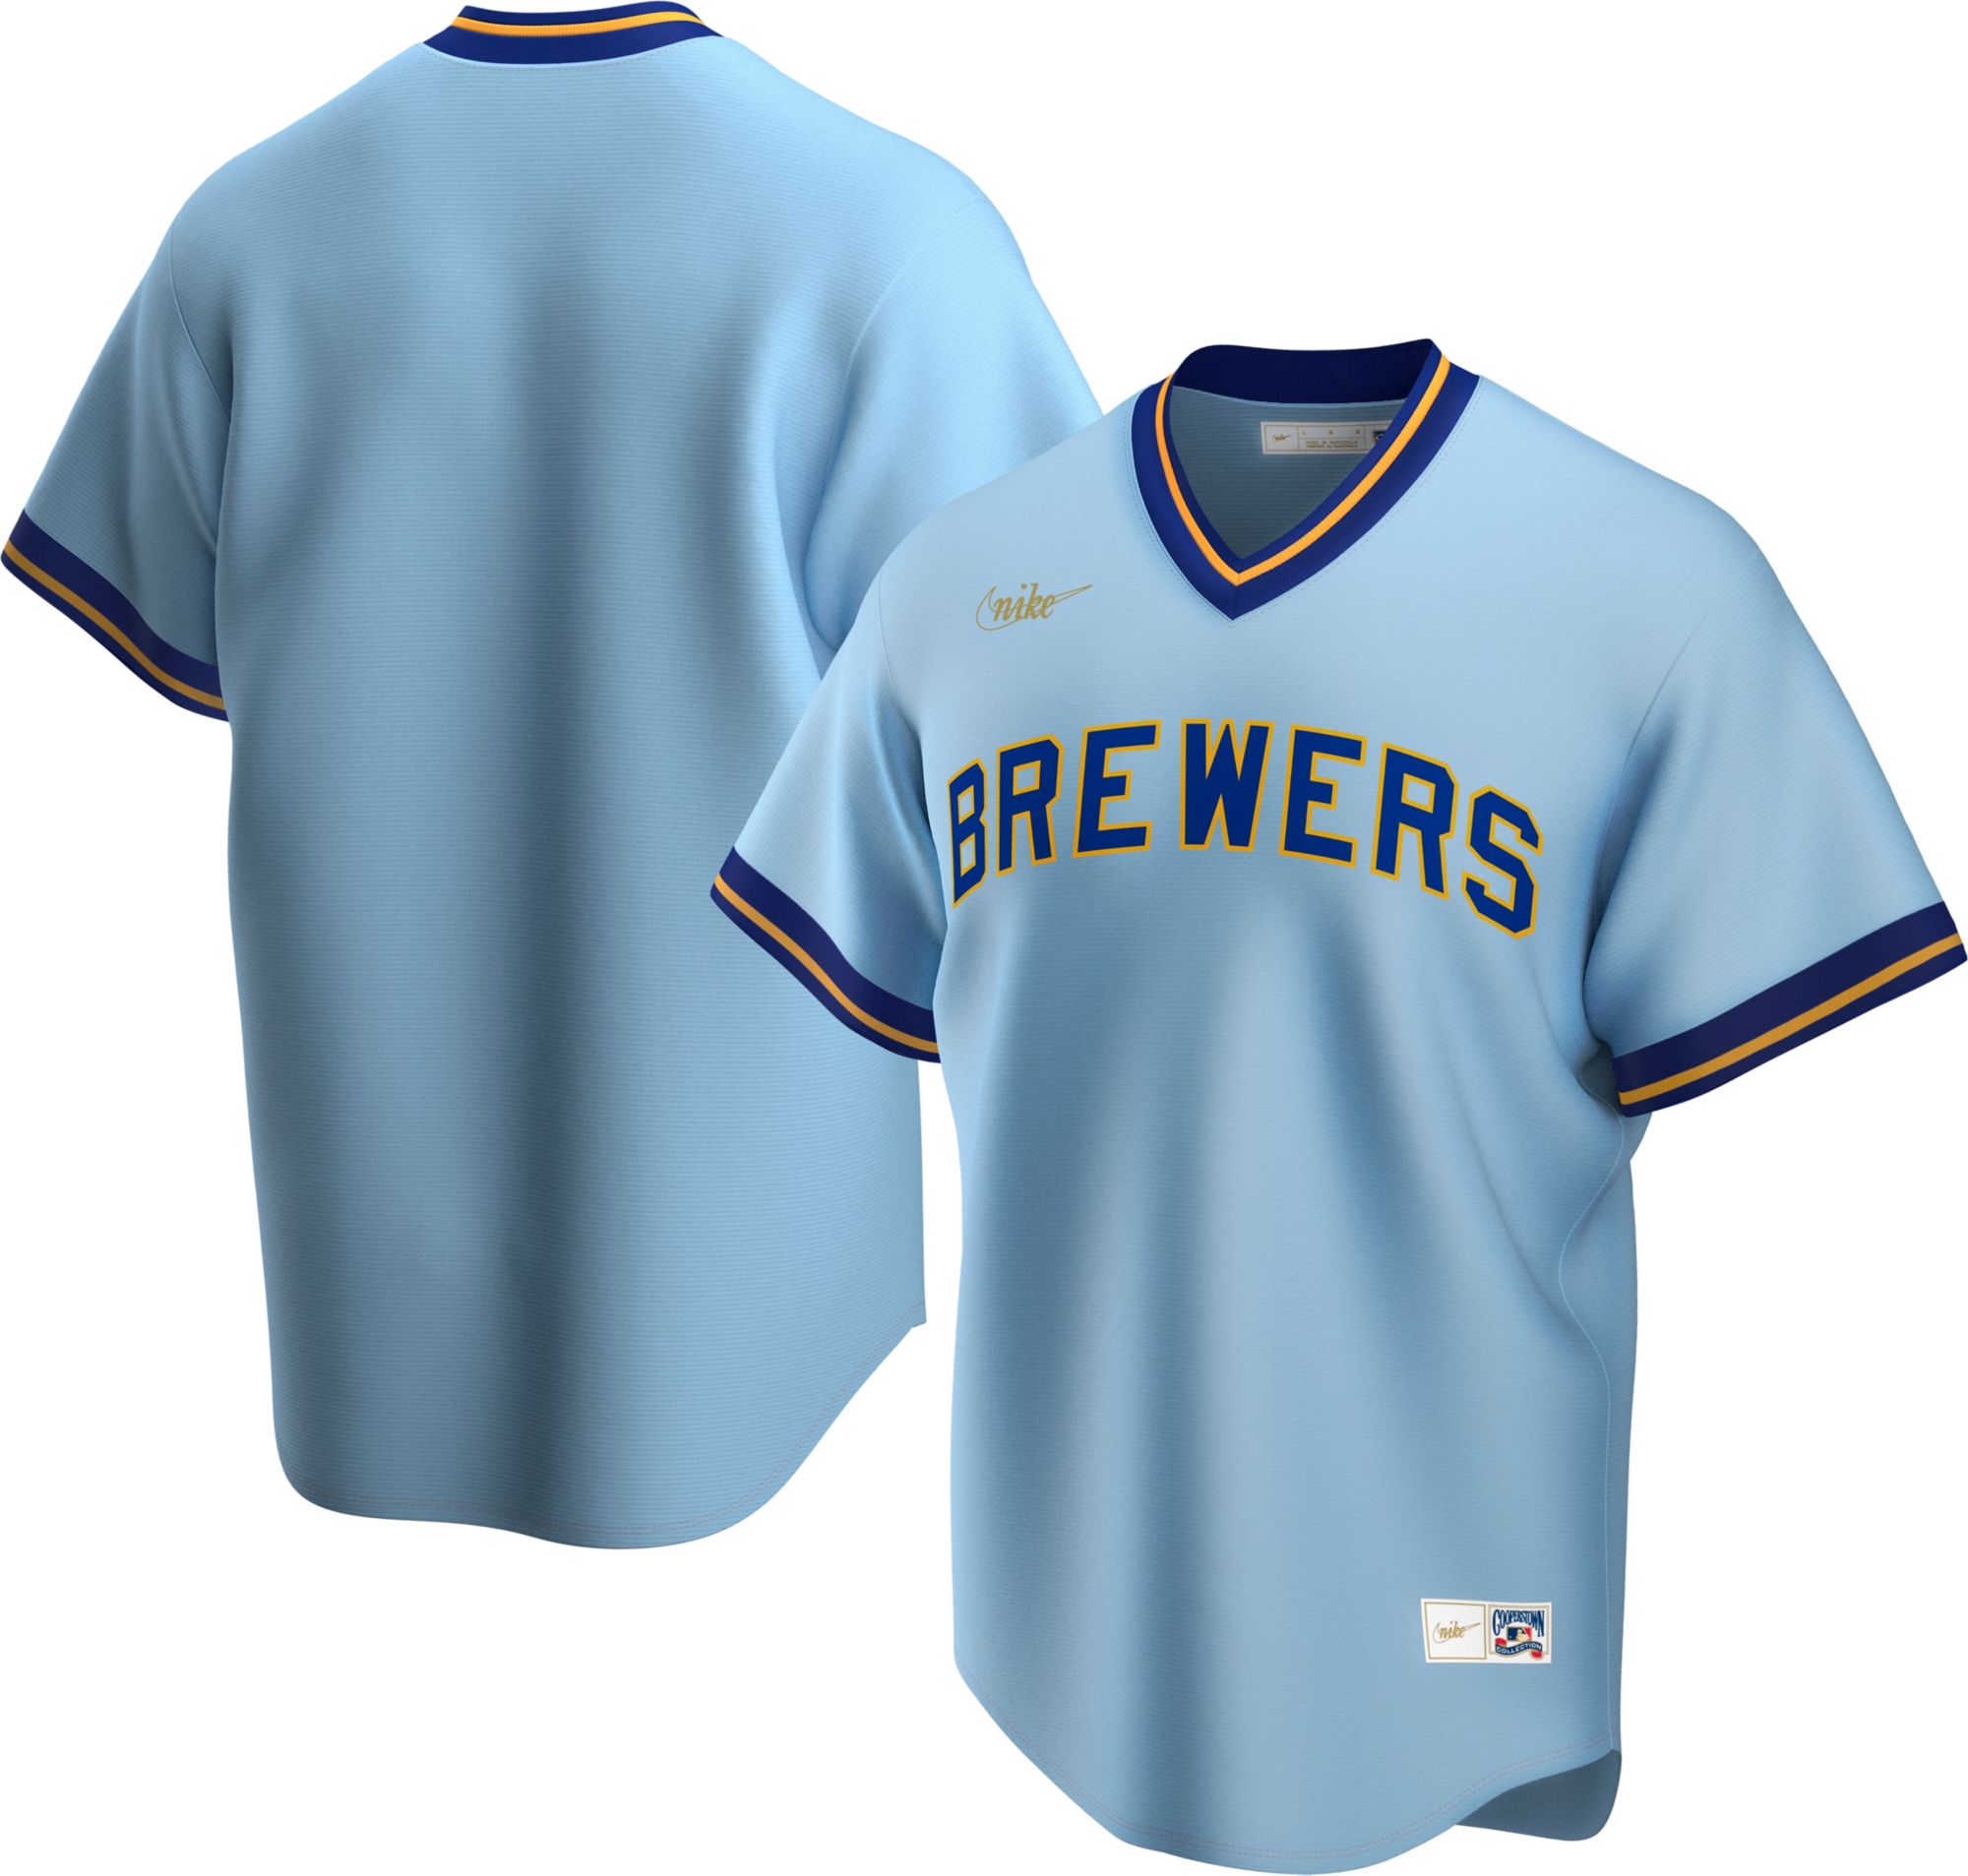 Nike / Men's Milwaukee Brewers Cooperstown Blue Cool Base Jersey